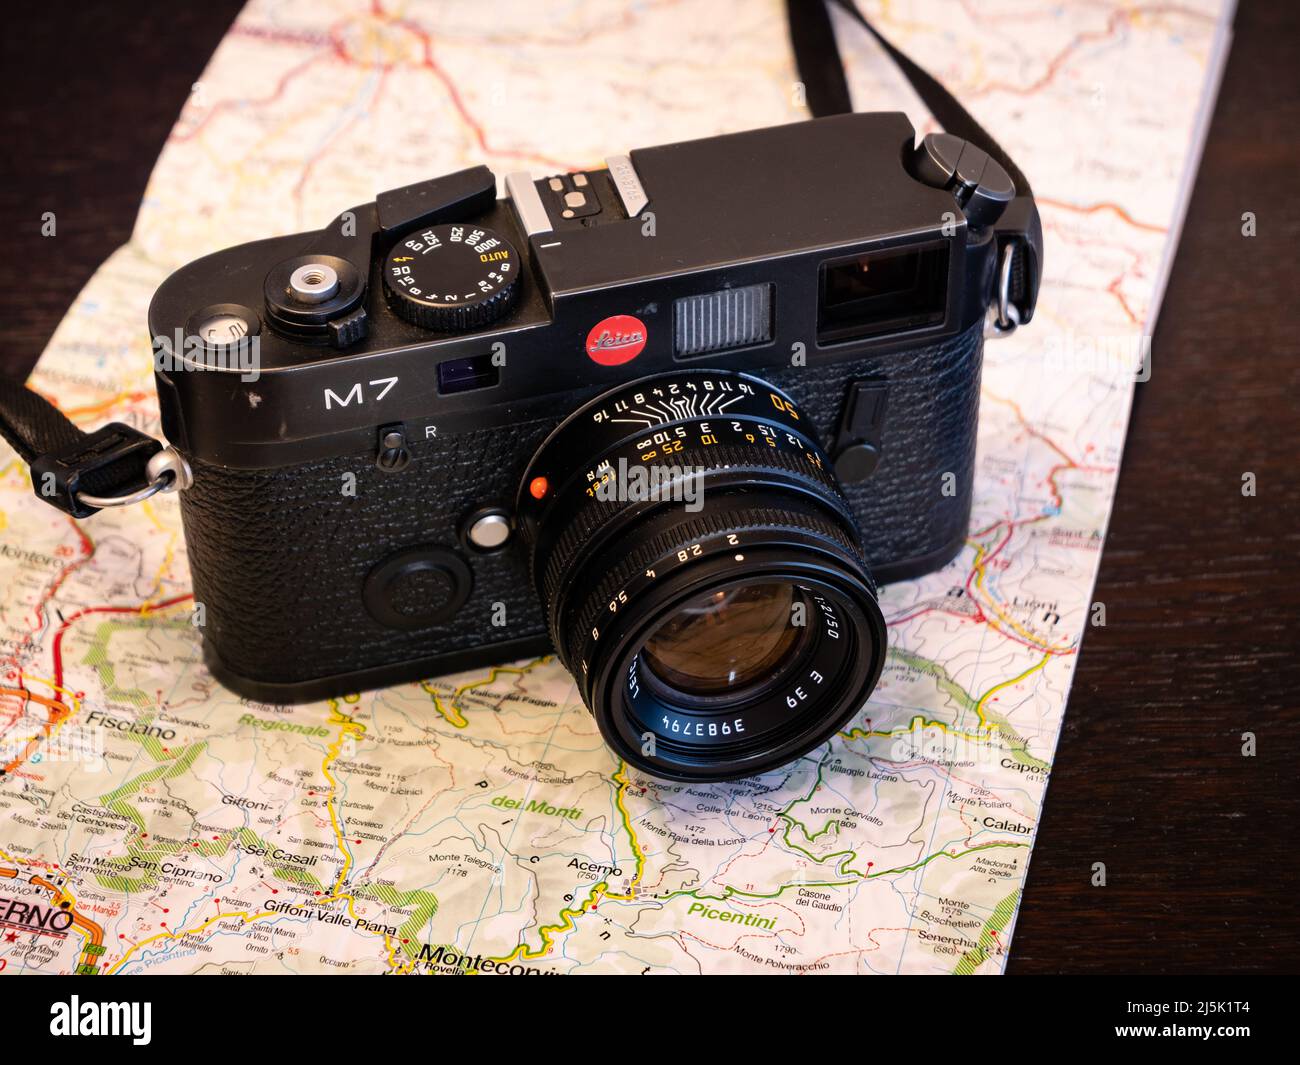 Wetzlar, Germany - January 5 2020: Leica M7 Analog Photo Camera in Black Finish with 50 mm Summicron Lens attached. Stock Photo